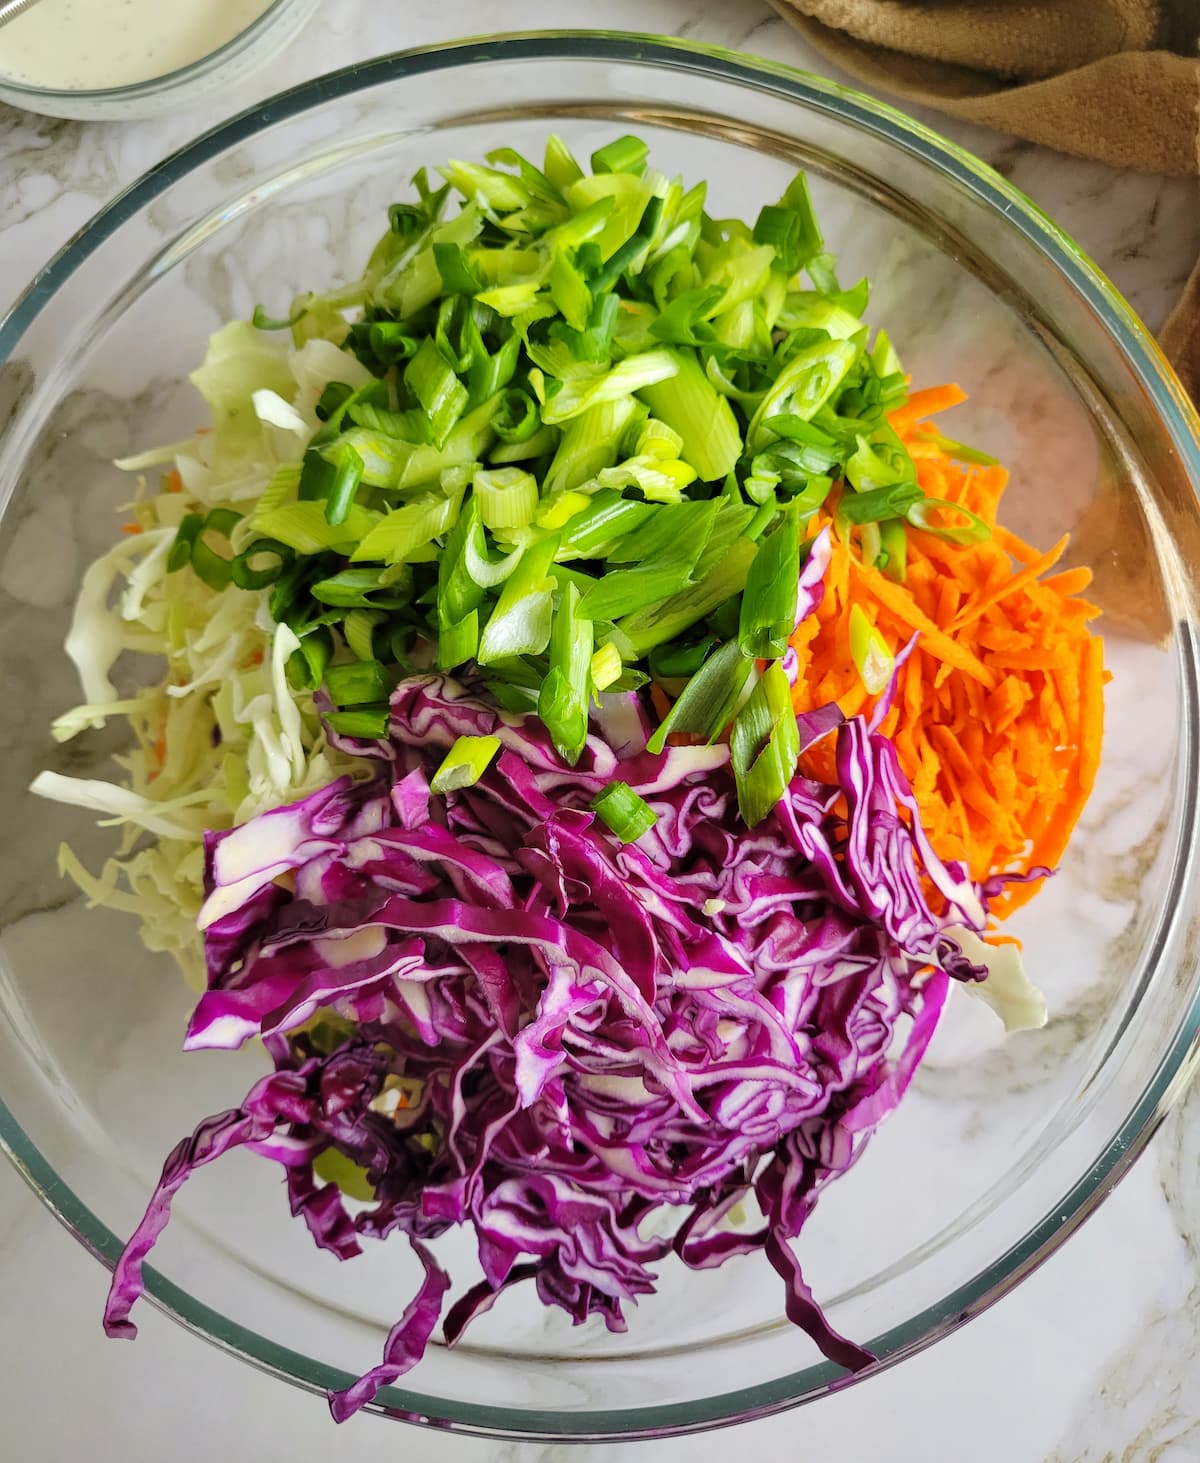 red cabbage, green cabbage, carrots and green onion in a bowl